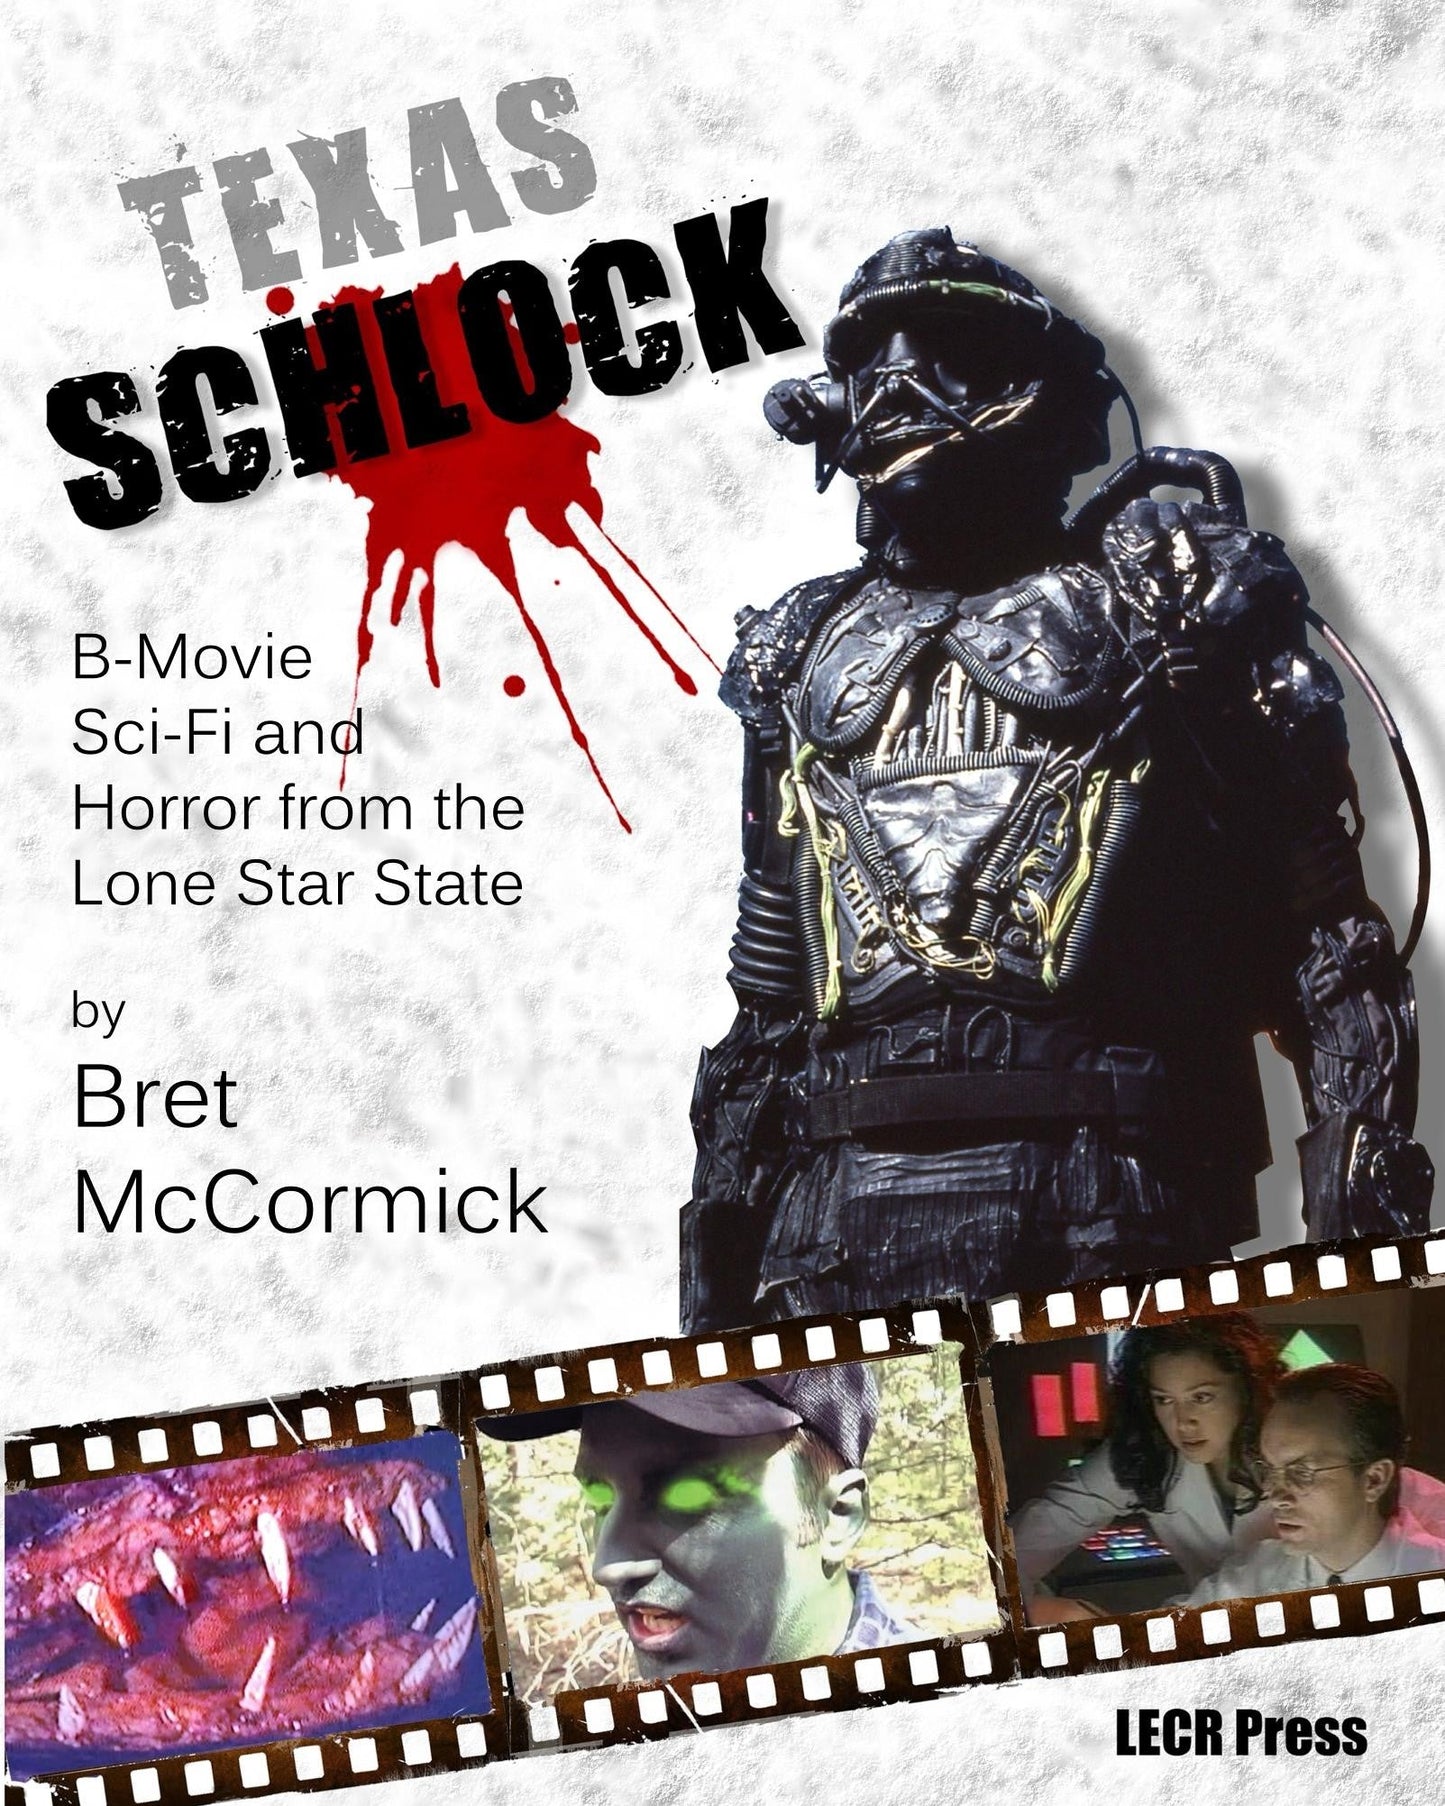 Texas Schlock: B-Movie Sci-Fi and Horror from the Lone Star State